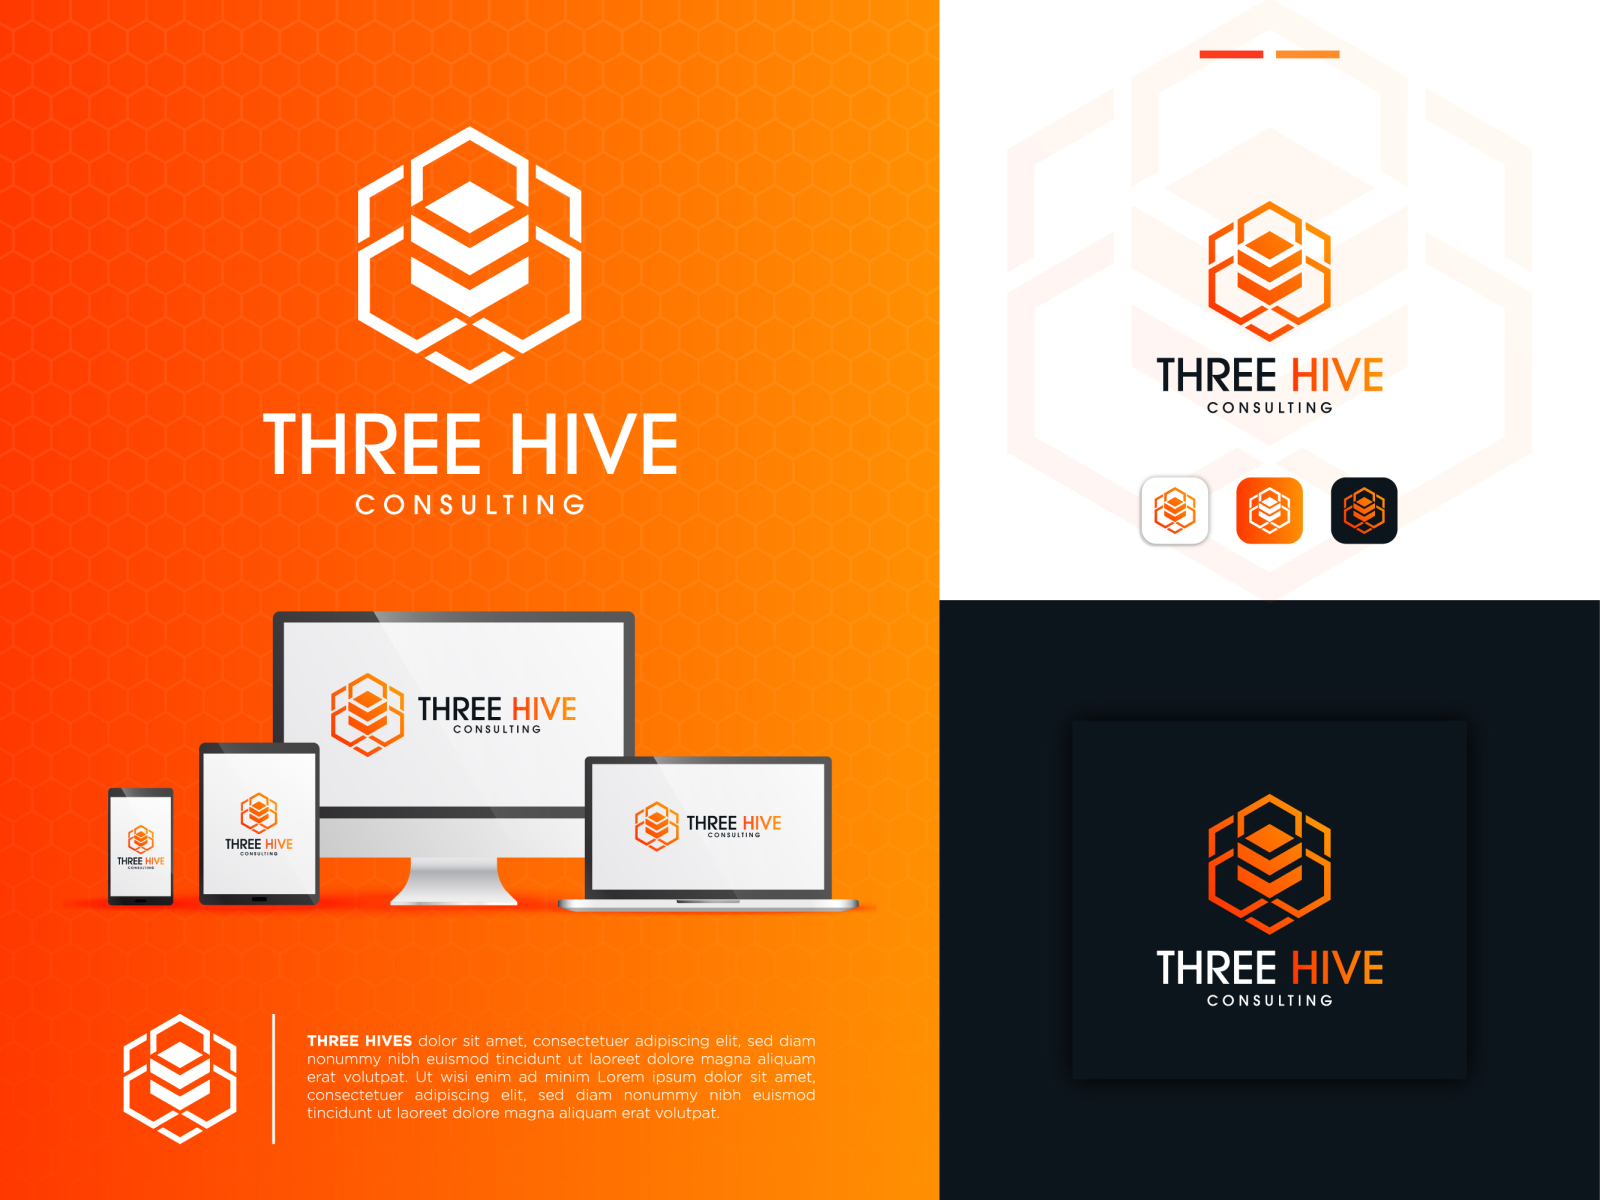 Hive Logo Photos and Images | Shutterstock